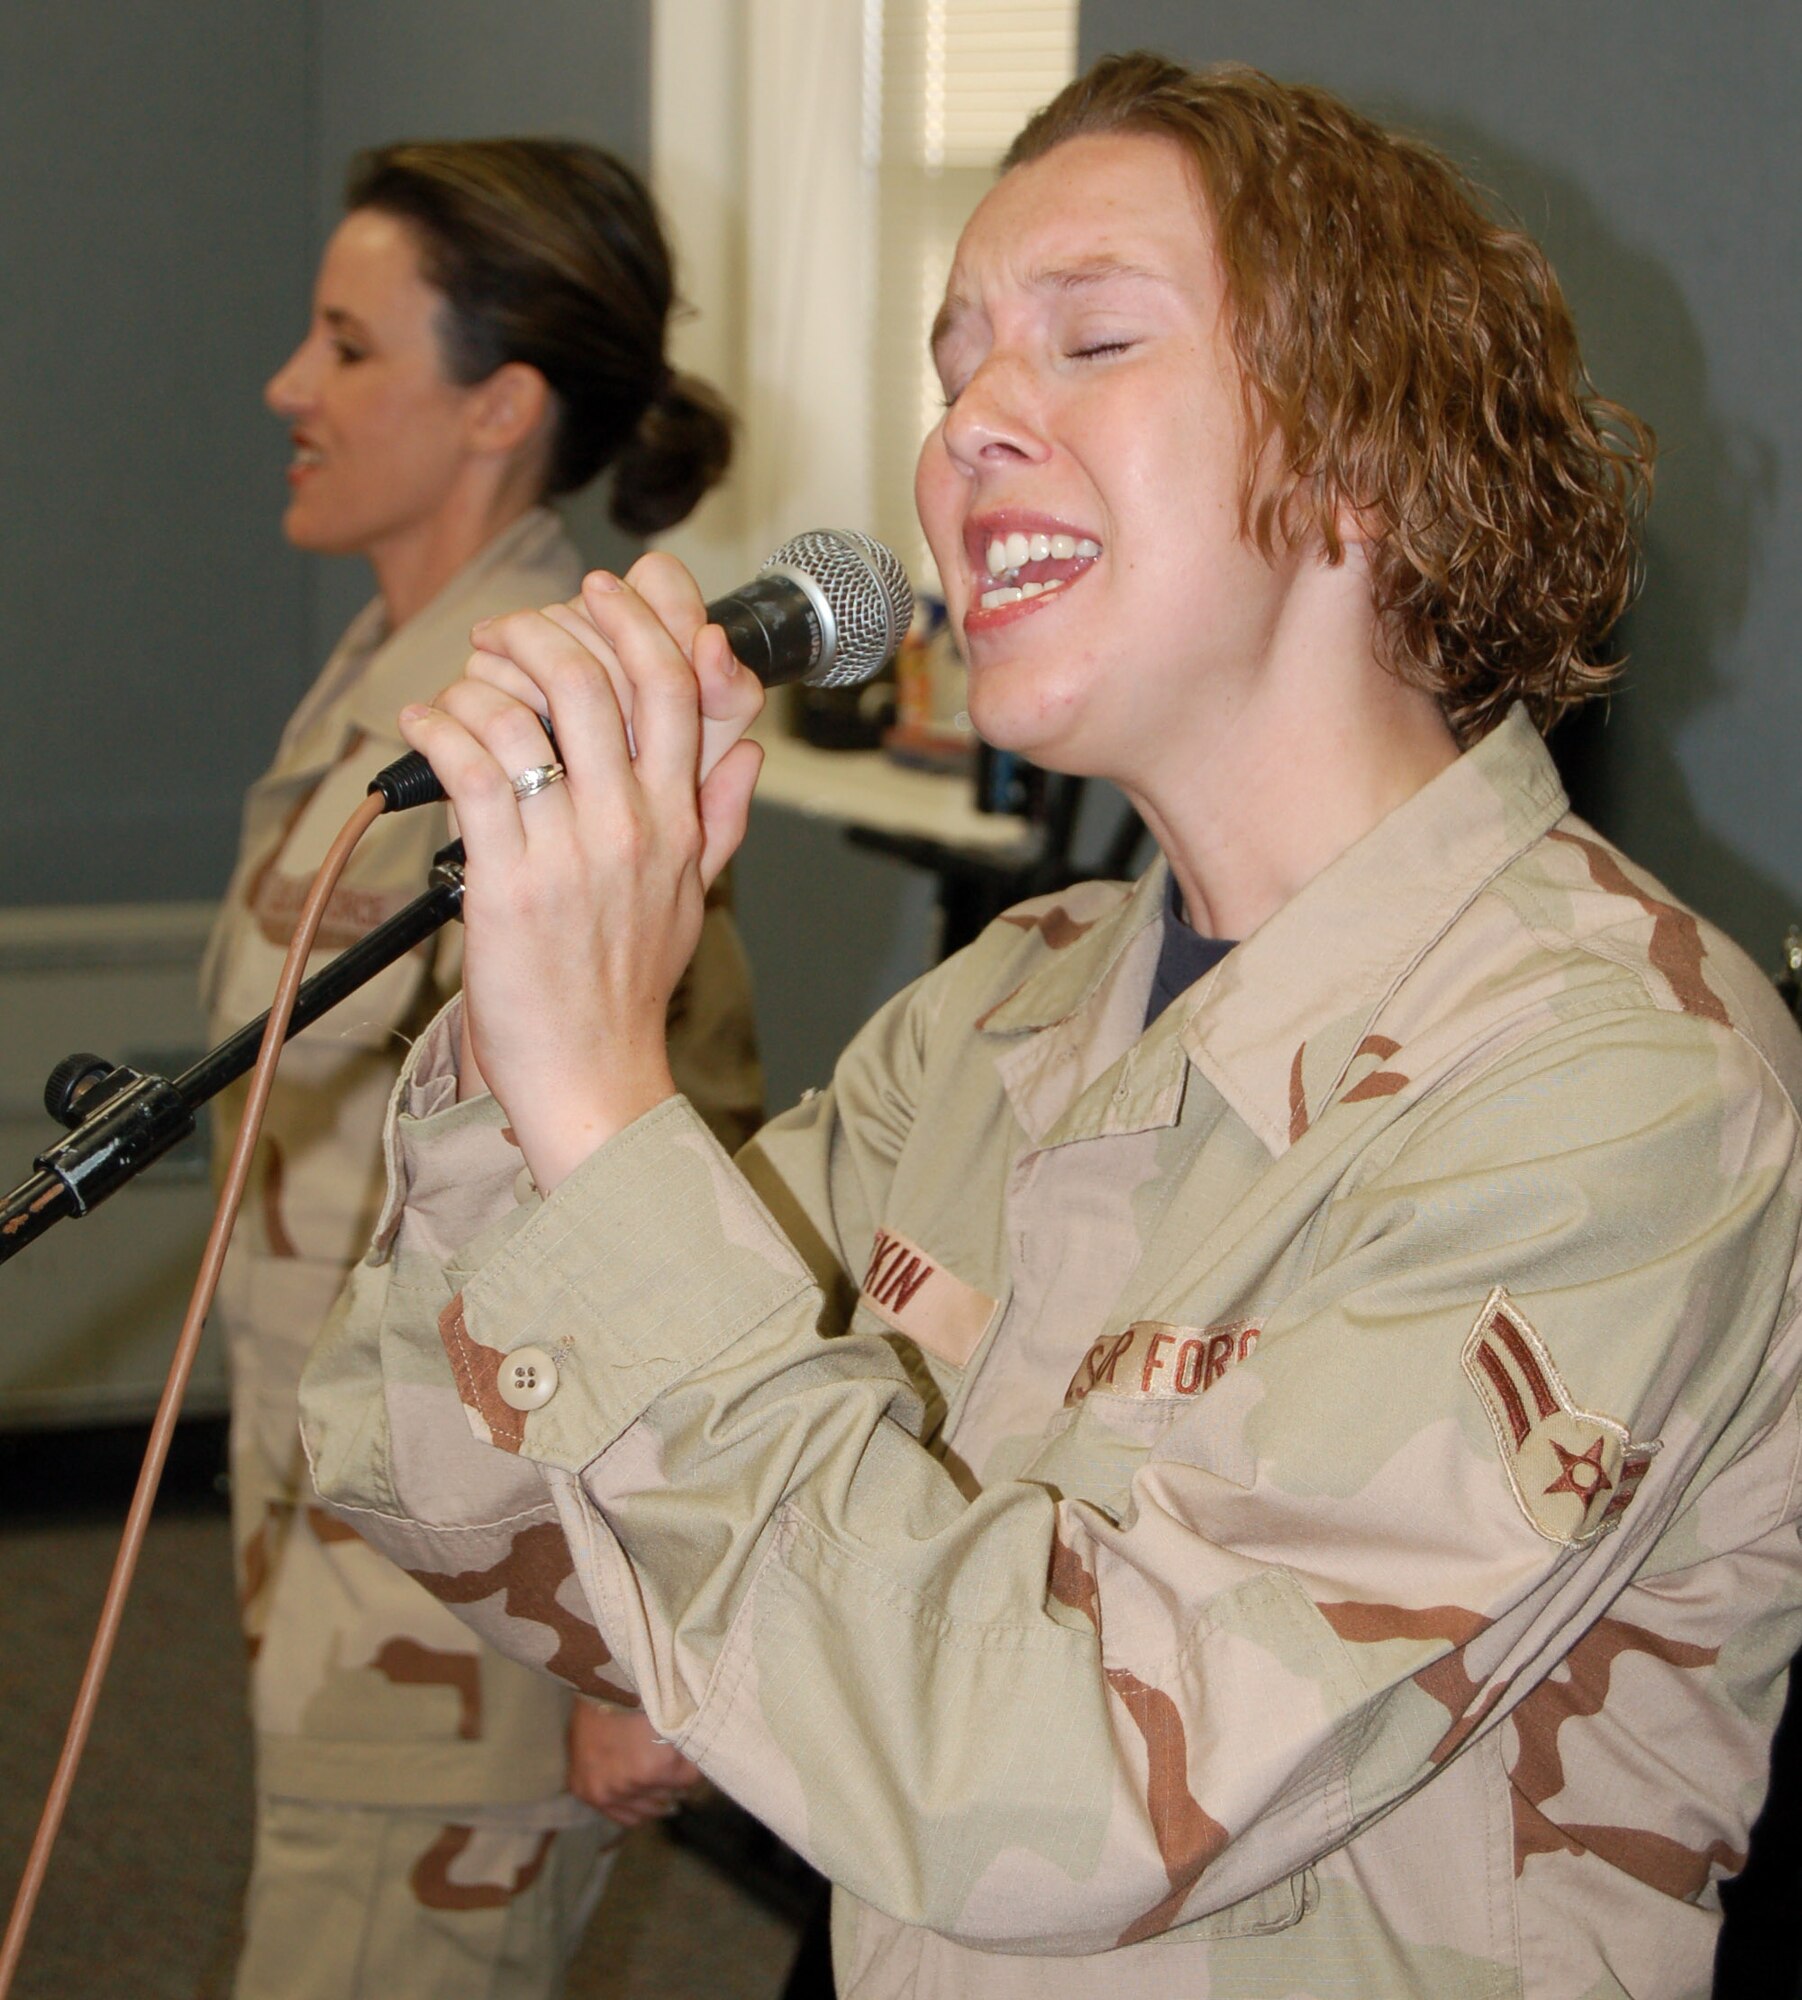 Airman 1st Class Melissa Plotkin (front) sings with fellow vocalist Tech. Sgt. Donna Siler during a rehearsal Oct. 4.   Both are with the Air Force Band of the West's Top Flight rock band at Lackland Air Force Base, Texas.  The band will be deploying soon to Southwest Asia.  (U.S. Air Force photo/Staff Sgt. Shad Eidson) 